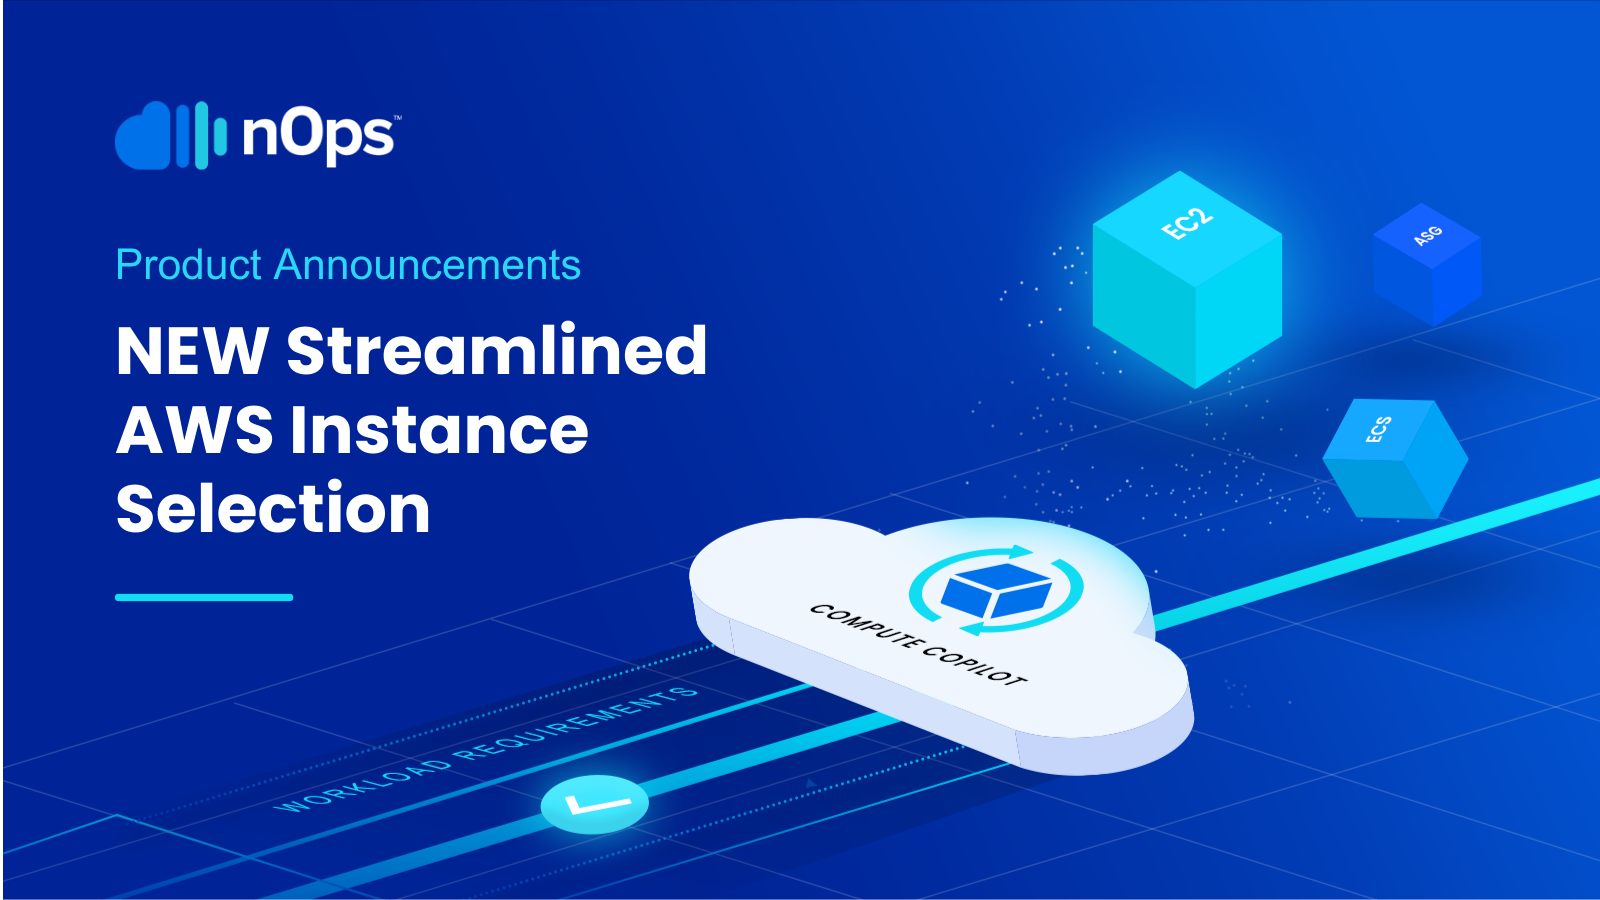 Featured image for the product announcement blog titled NEW Streamlined AWS Instance Selection based on workload requirements.